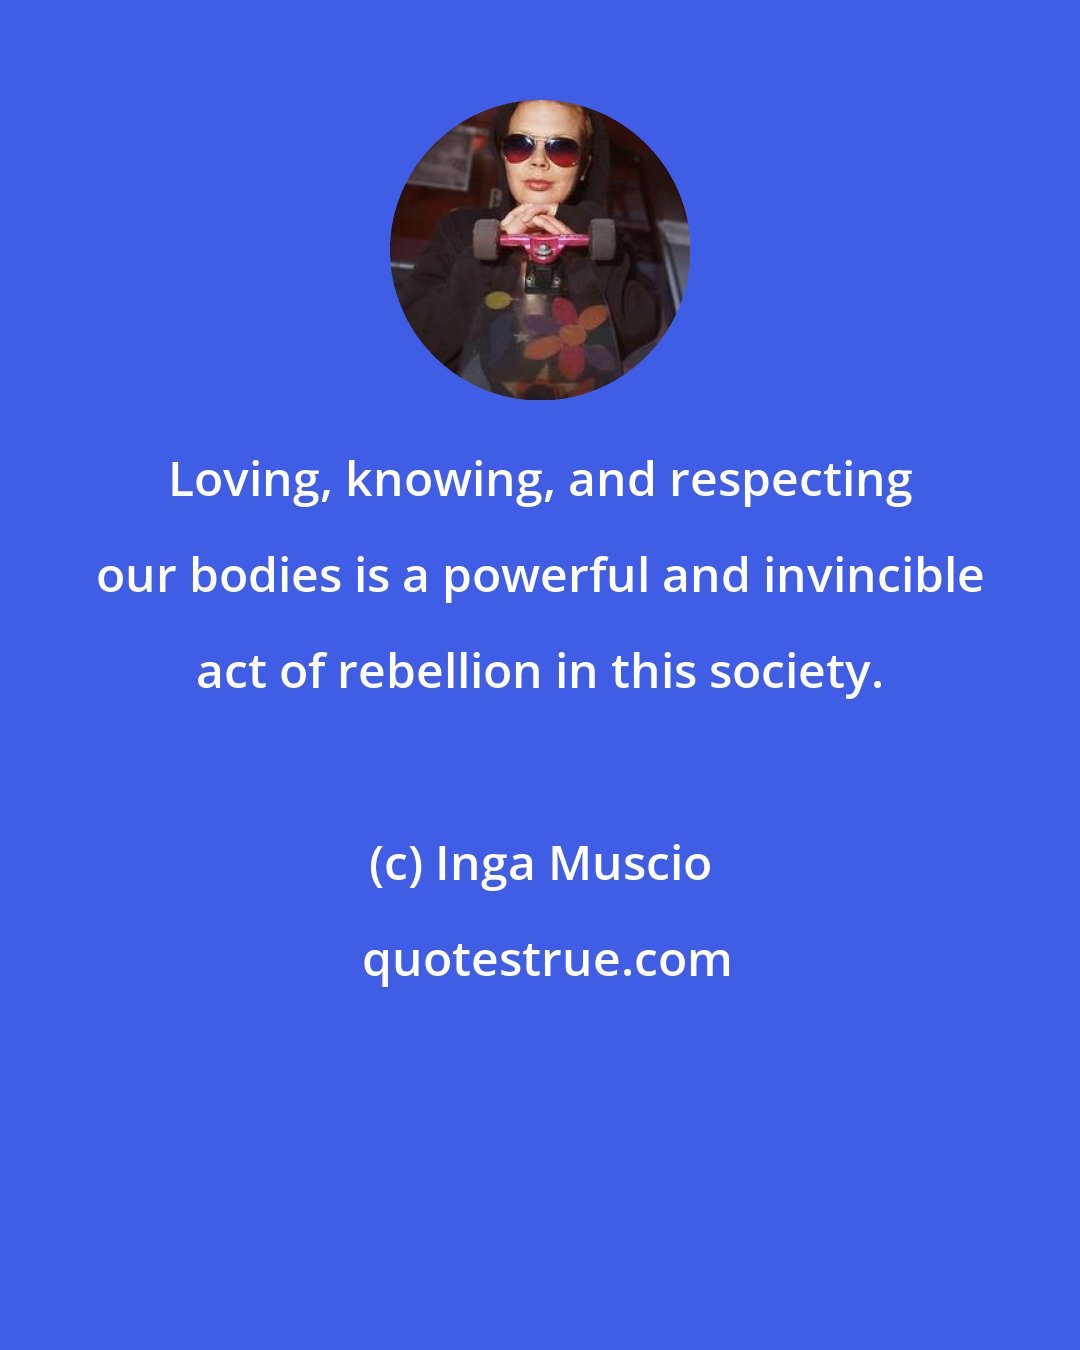 Inga Muscio: Loving, knowing, and respecting our bodies is a powerful and invincible act of rebellion in this society.